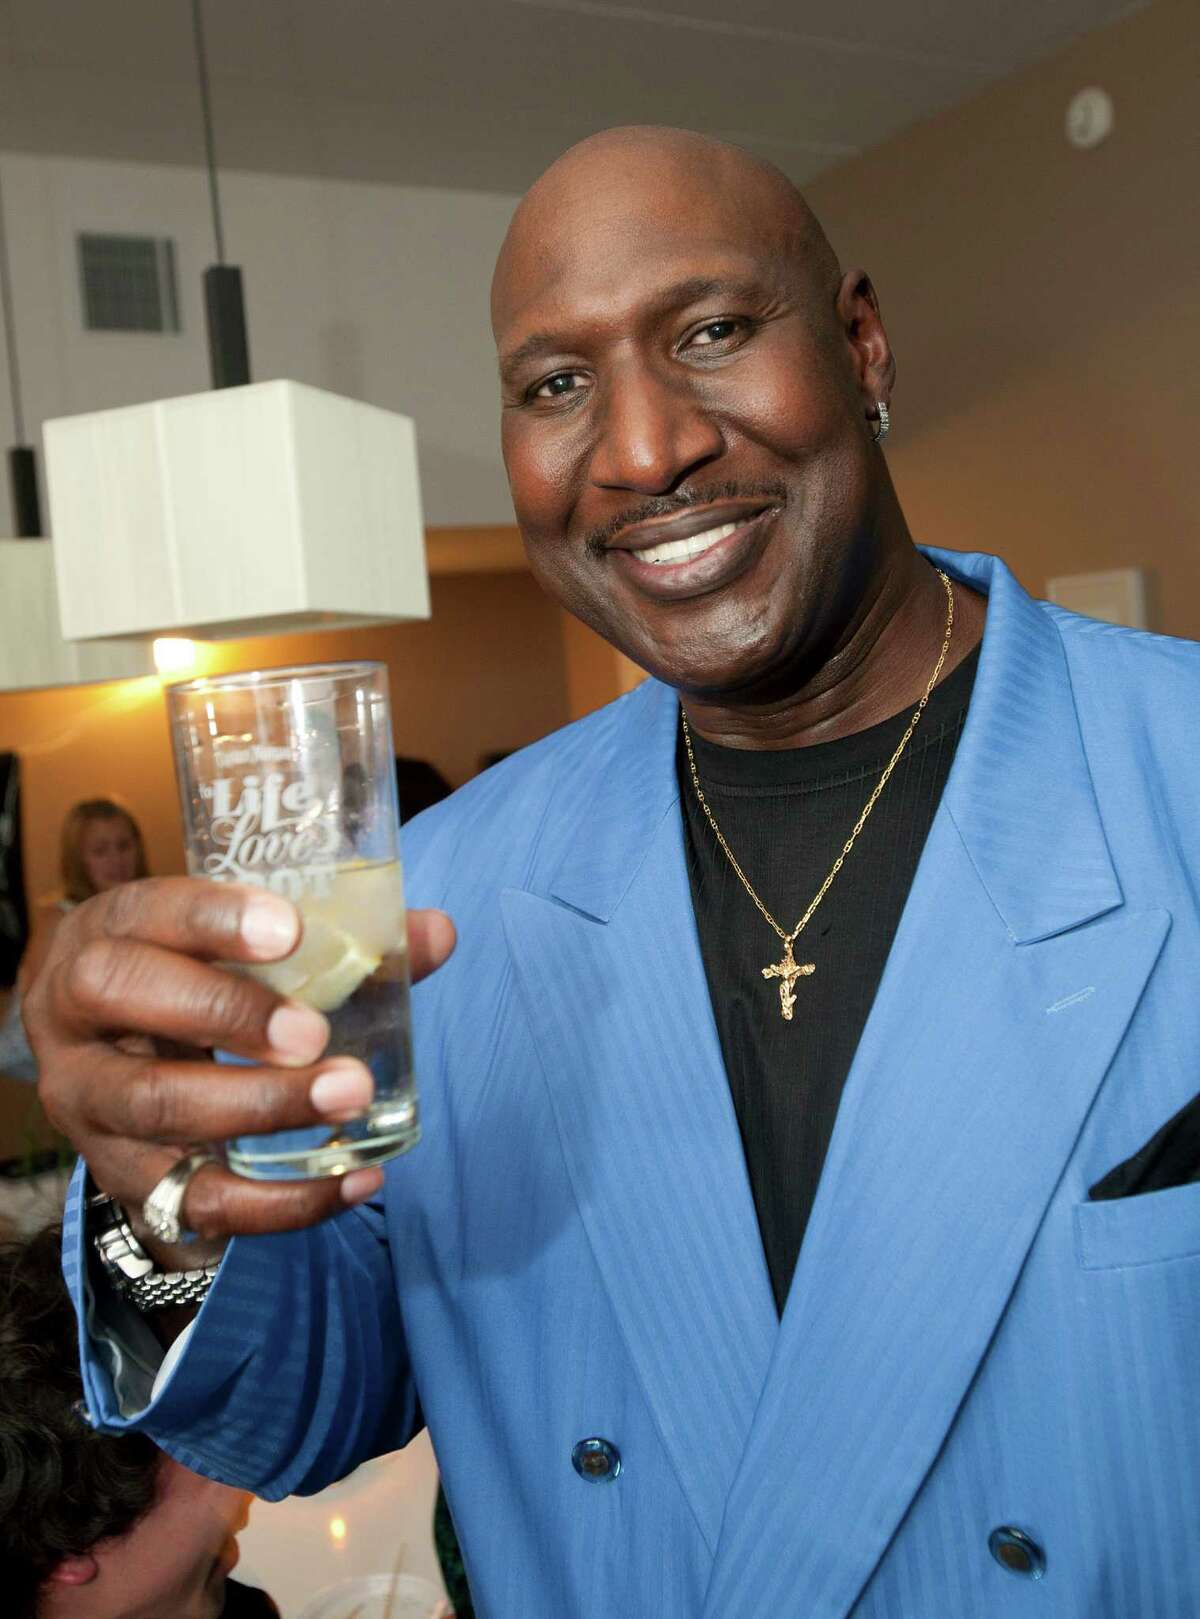 ** COMMERCIAL IMAGE ** In this photograph taken by AP Images for Captain Morgan, Darryl Dawkins, a former 76er, kicks off summer with the Captain Morgan Long Island Iced Tea house party in Philadelphia Thursday, May 26, 2011. (Mark Stehle/AP Images for Captain Morgan)